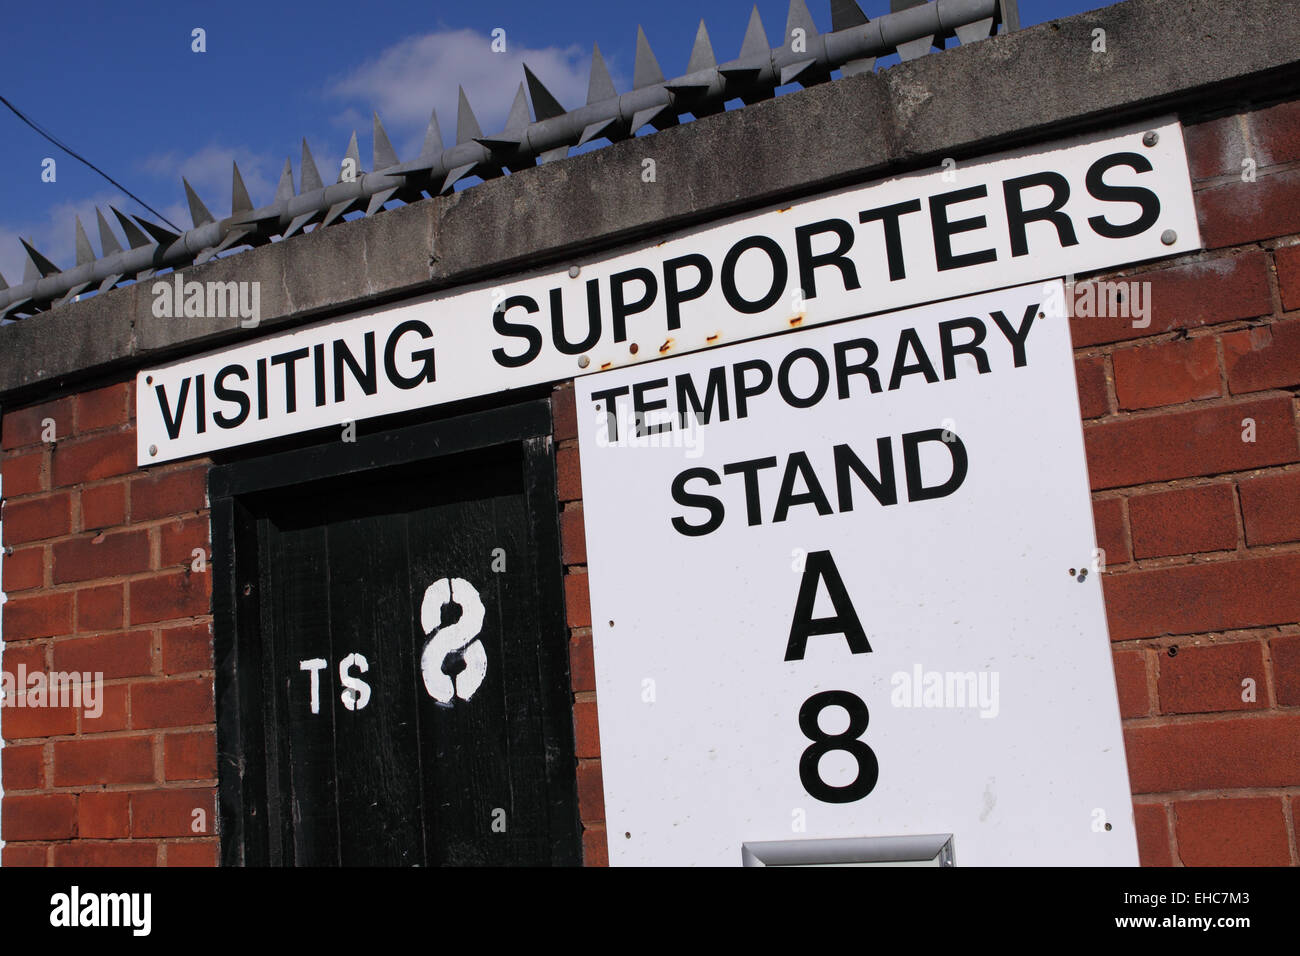 Football ground entrance for visiting supporters fans sign in Hereford England UK Stock Photo